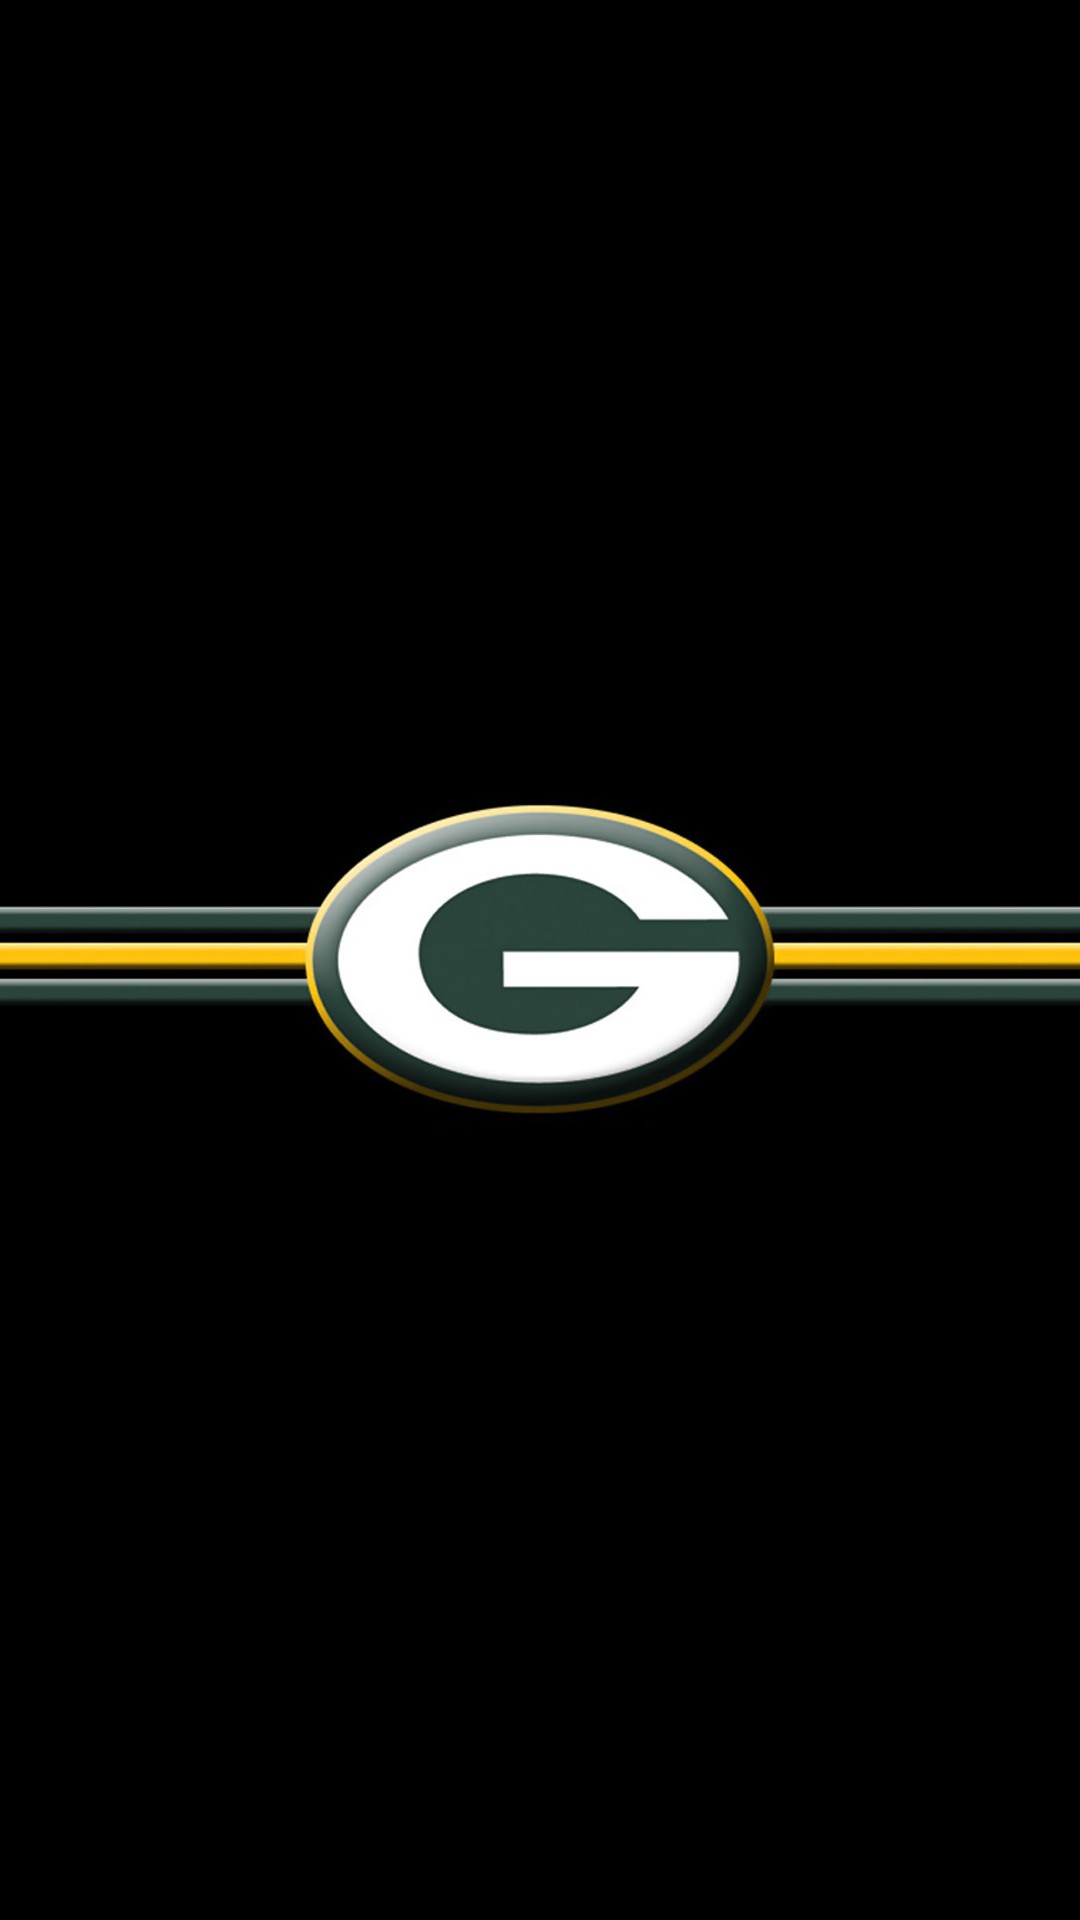 Green Bay Packers Logo iPhone Apple Wallpaper With high-resolution 1080X1920 pixel. Donwload and set as wallpaper for your iPhone X, iPhone XS home screen backgrounds, XS Max, XR, iPhone8 lock screen wallpaper, iPhone 7, 6, SE, and other mobile devices